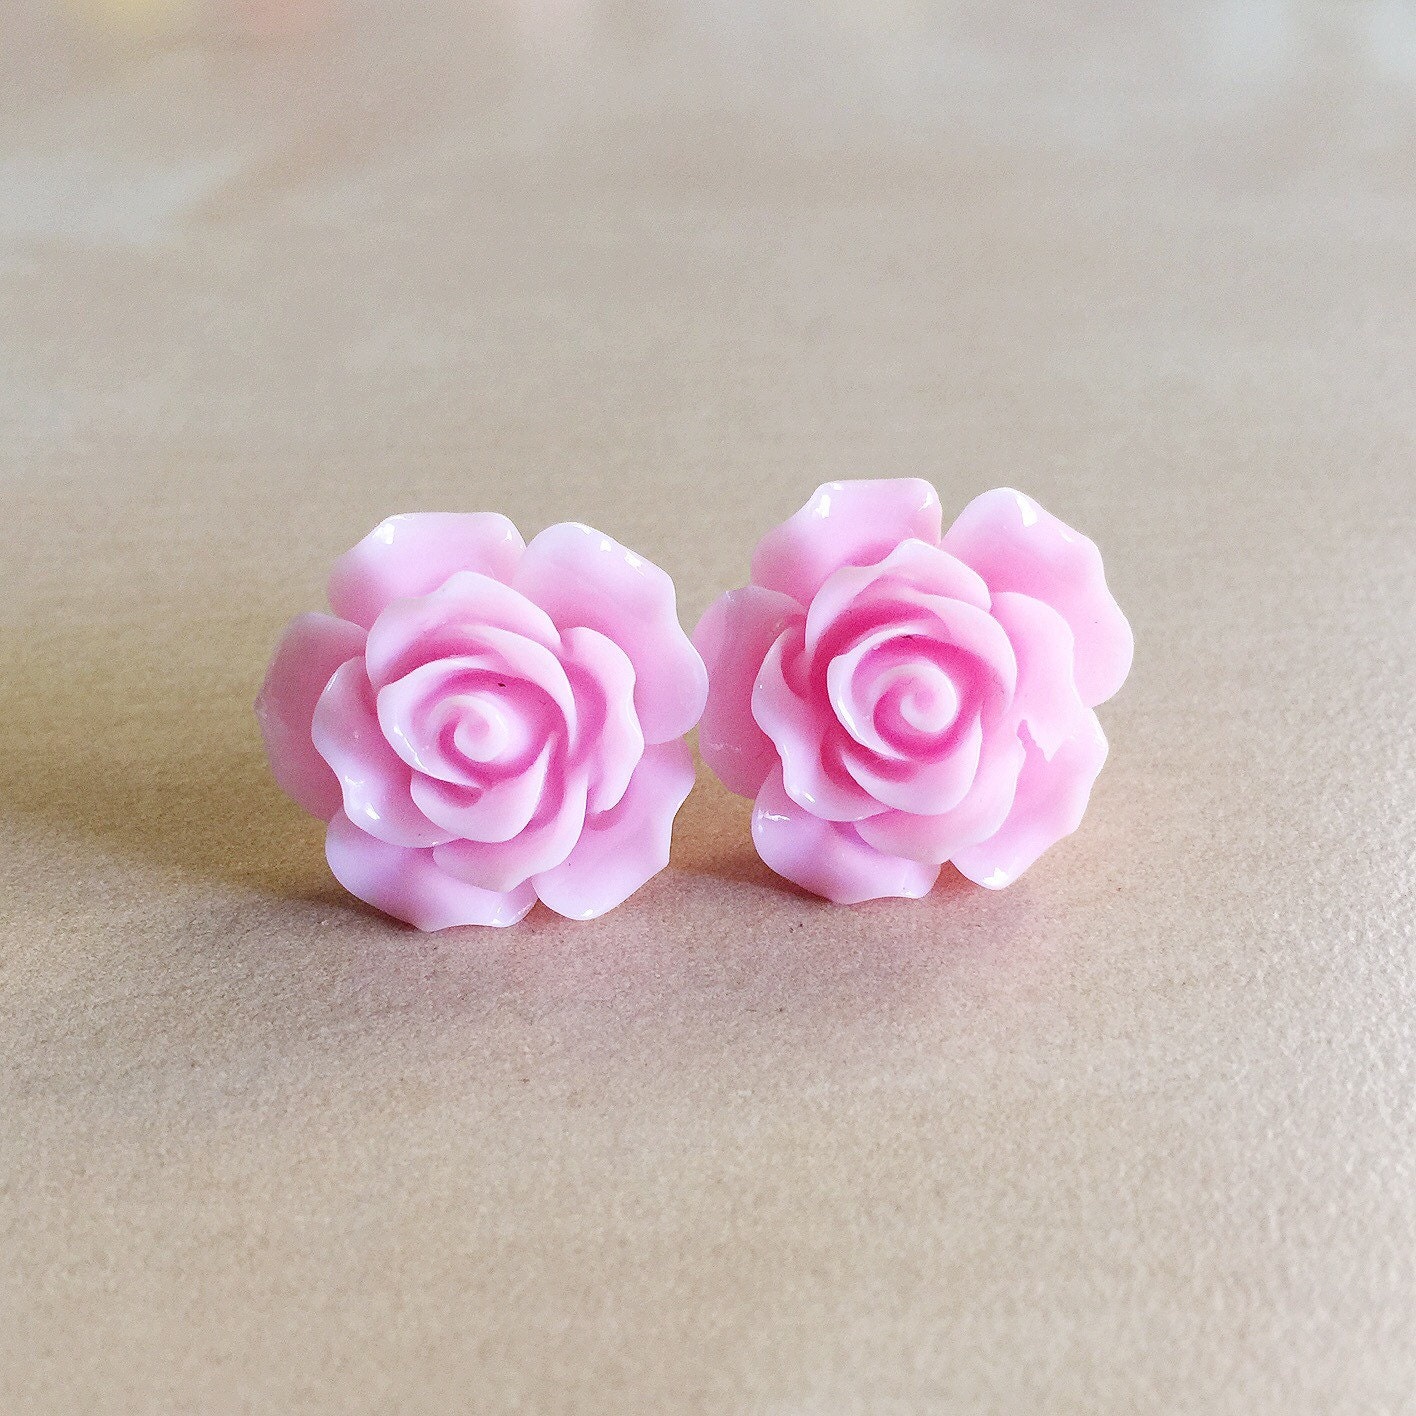 Pink Rose Earrings 20mm Resin Cabochons by BlueButtonBaubles